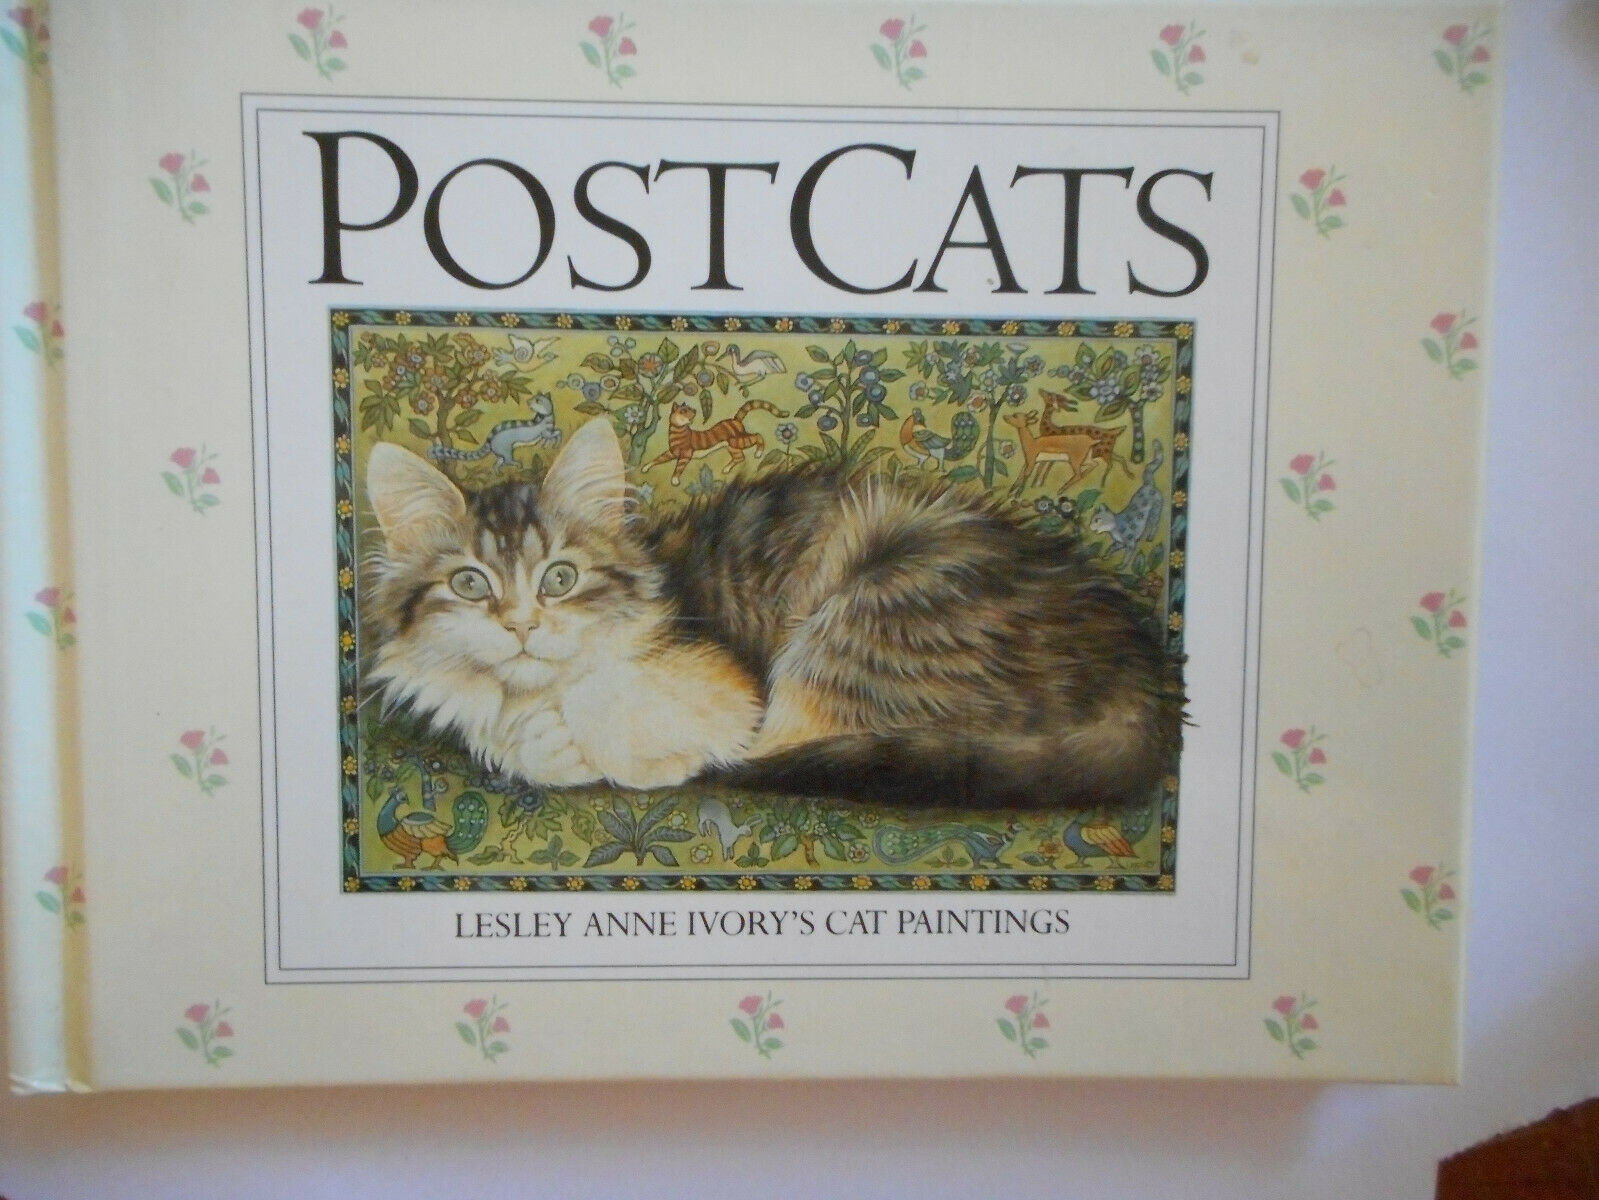 Post Cats = Postcats = Lesley Ane Ivory's Cat Paintings - Gorgeous/hardcover 1st